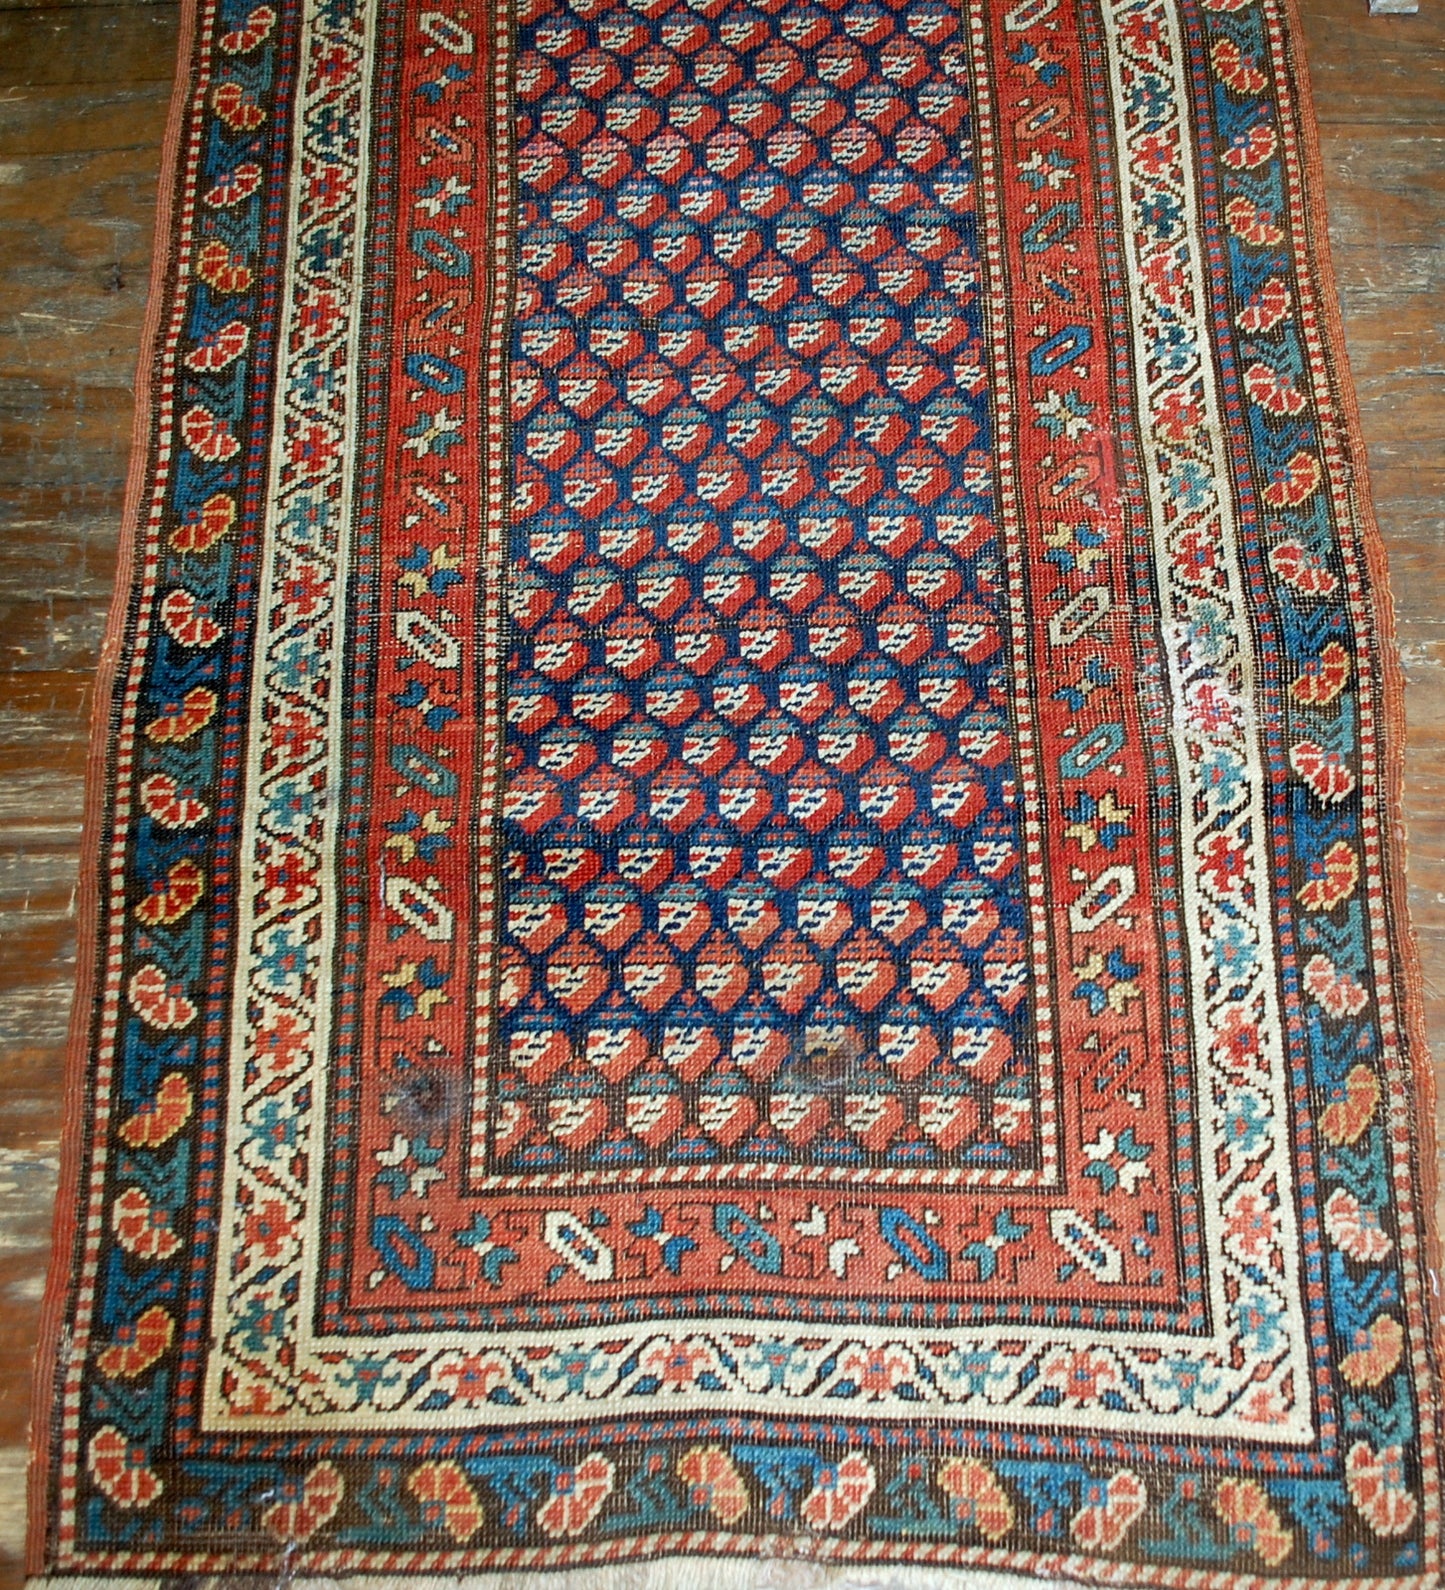 Antique hand made Caucasian Gendje rug in original condition. The rug has navy blue border and all over deign in red shades. 